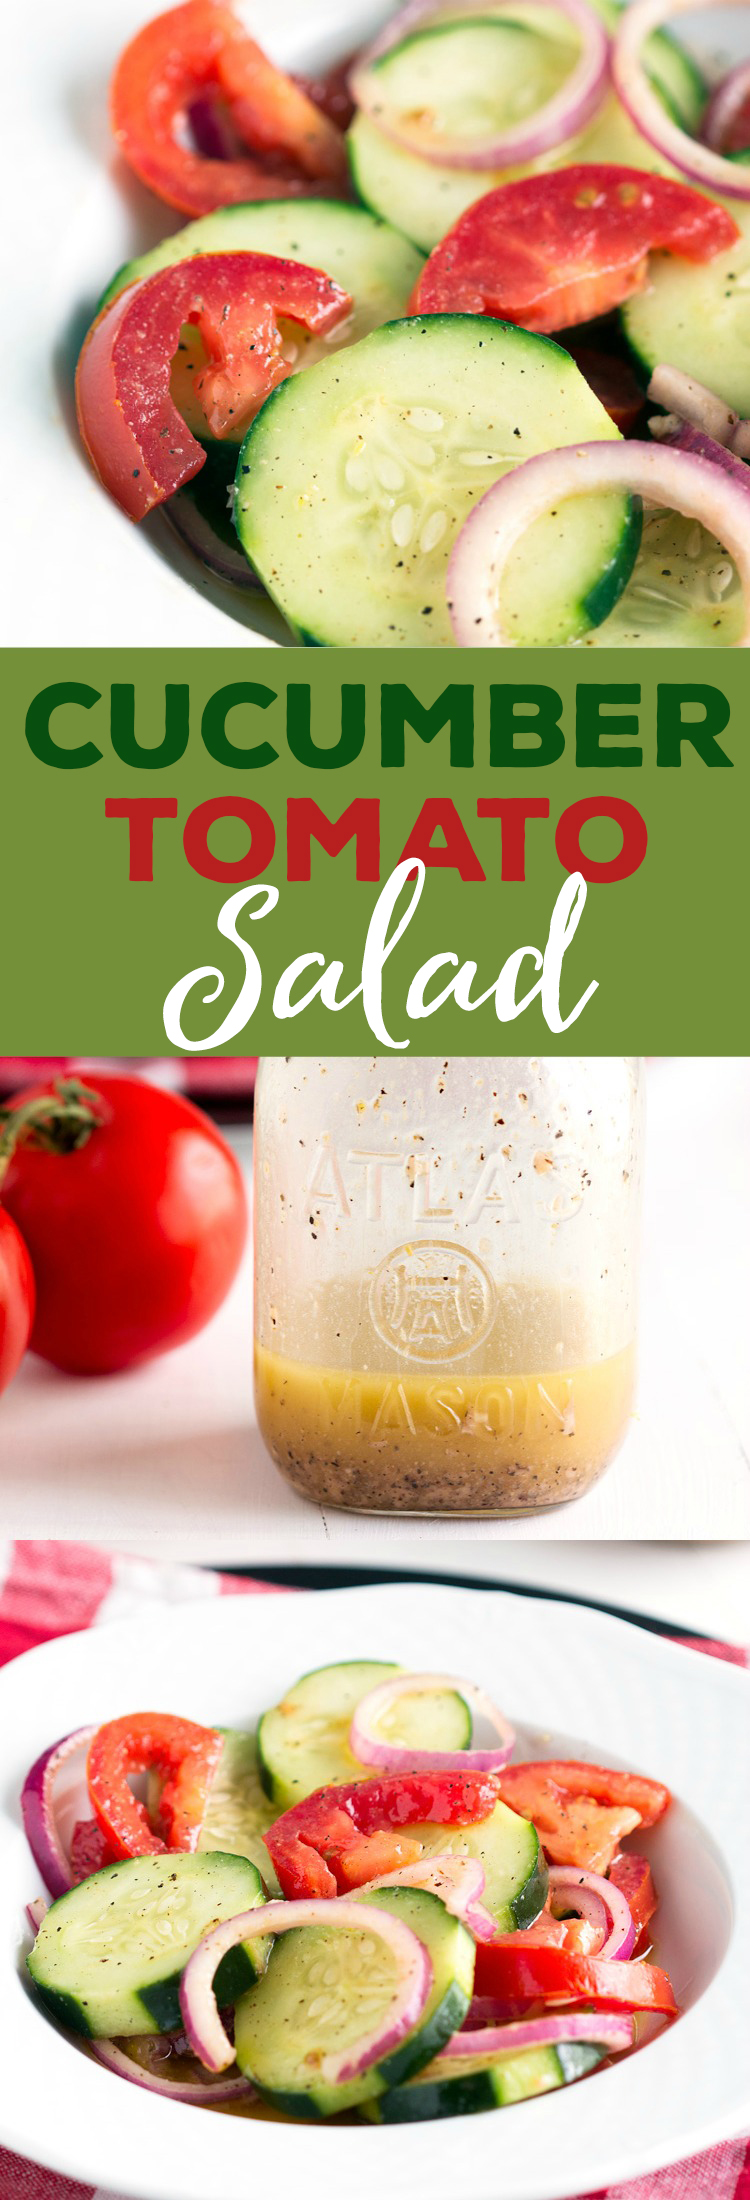 Cucumber Tomato Salad with dressing – Easy summer side dish, combo of fresh tomatoes, cucumbers, red onions with a simple homemade vinaigrette. 